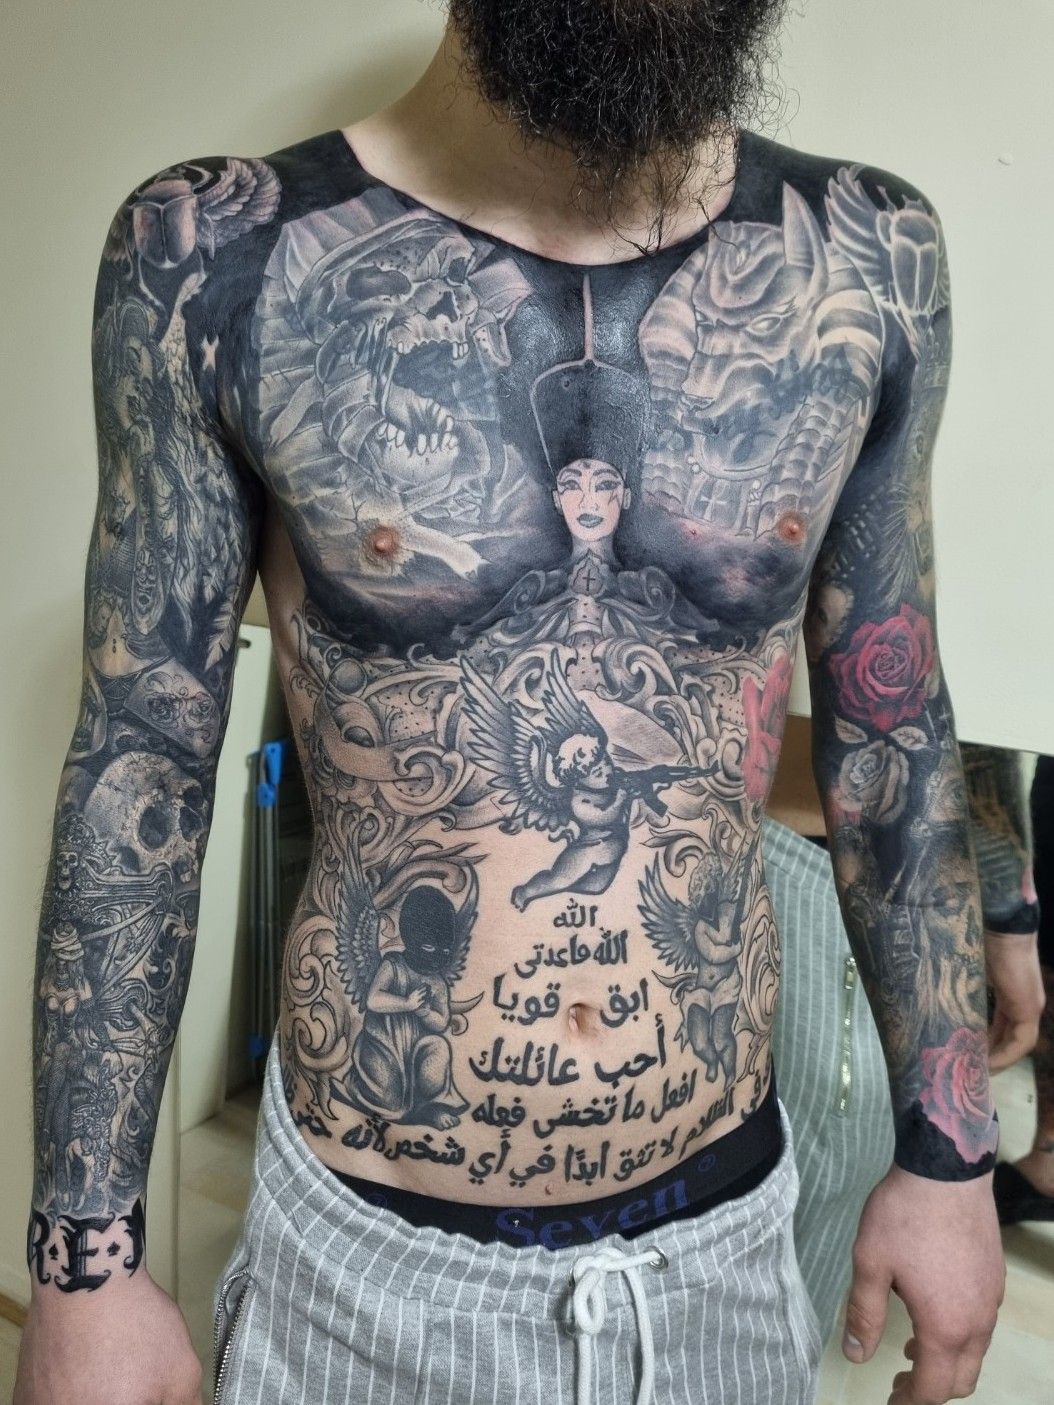 Full body tattoo Images - Search Images on Everypixel